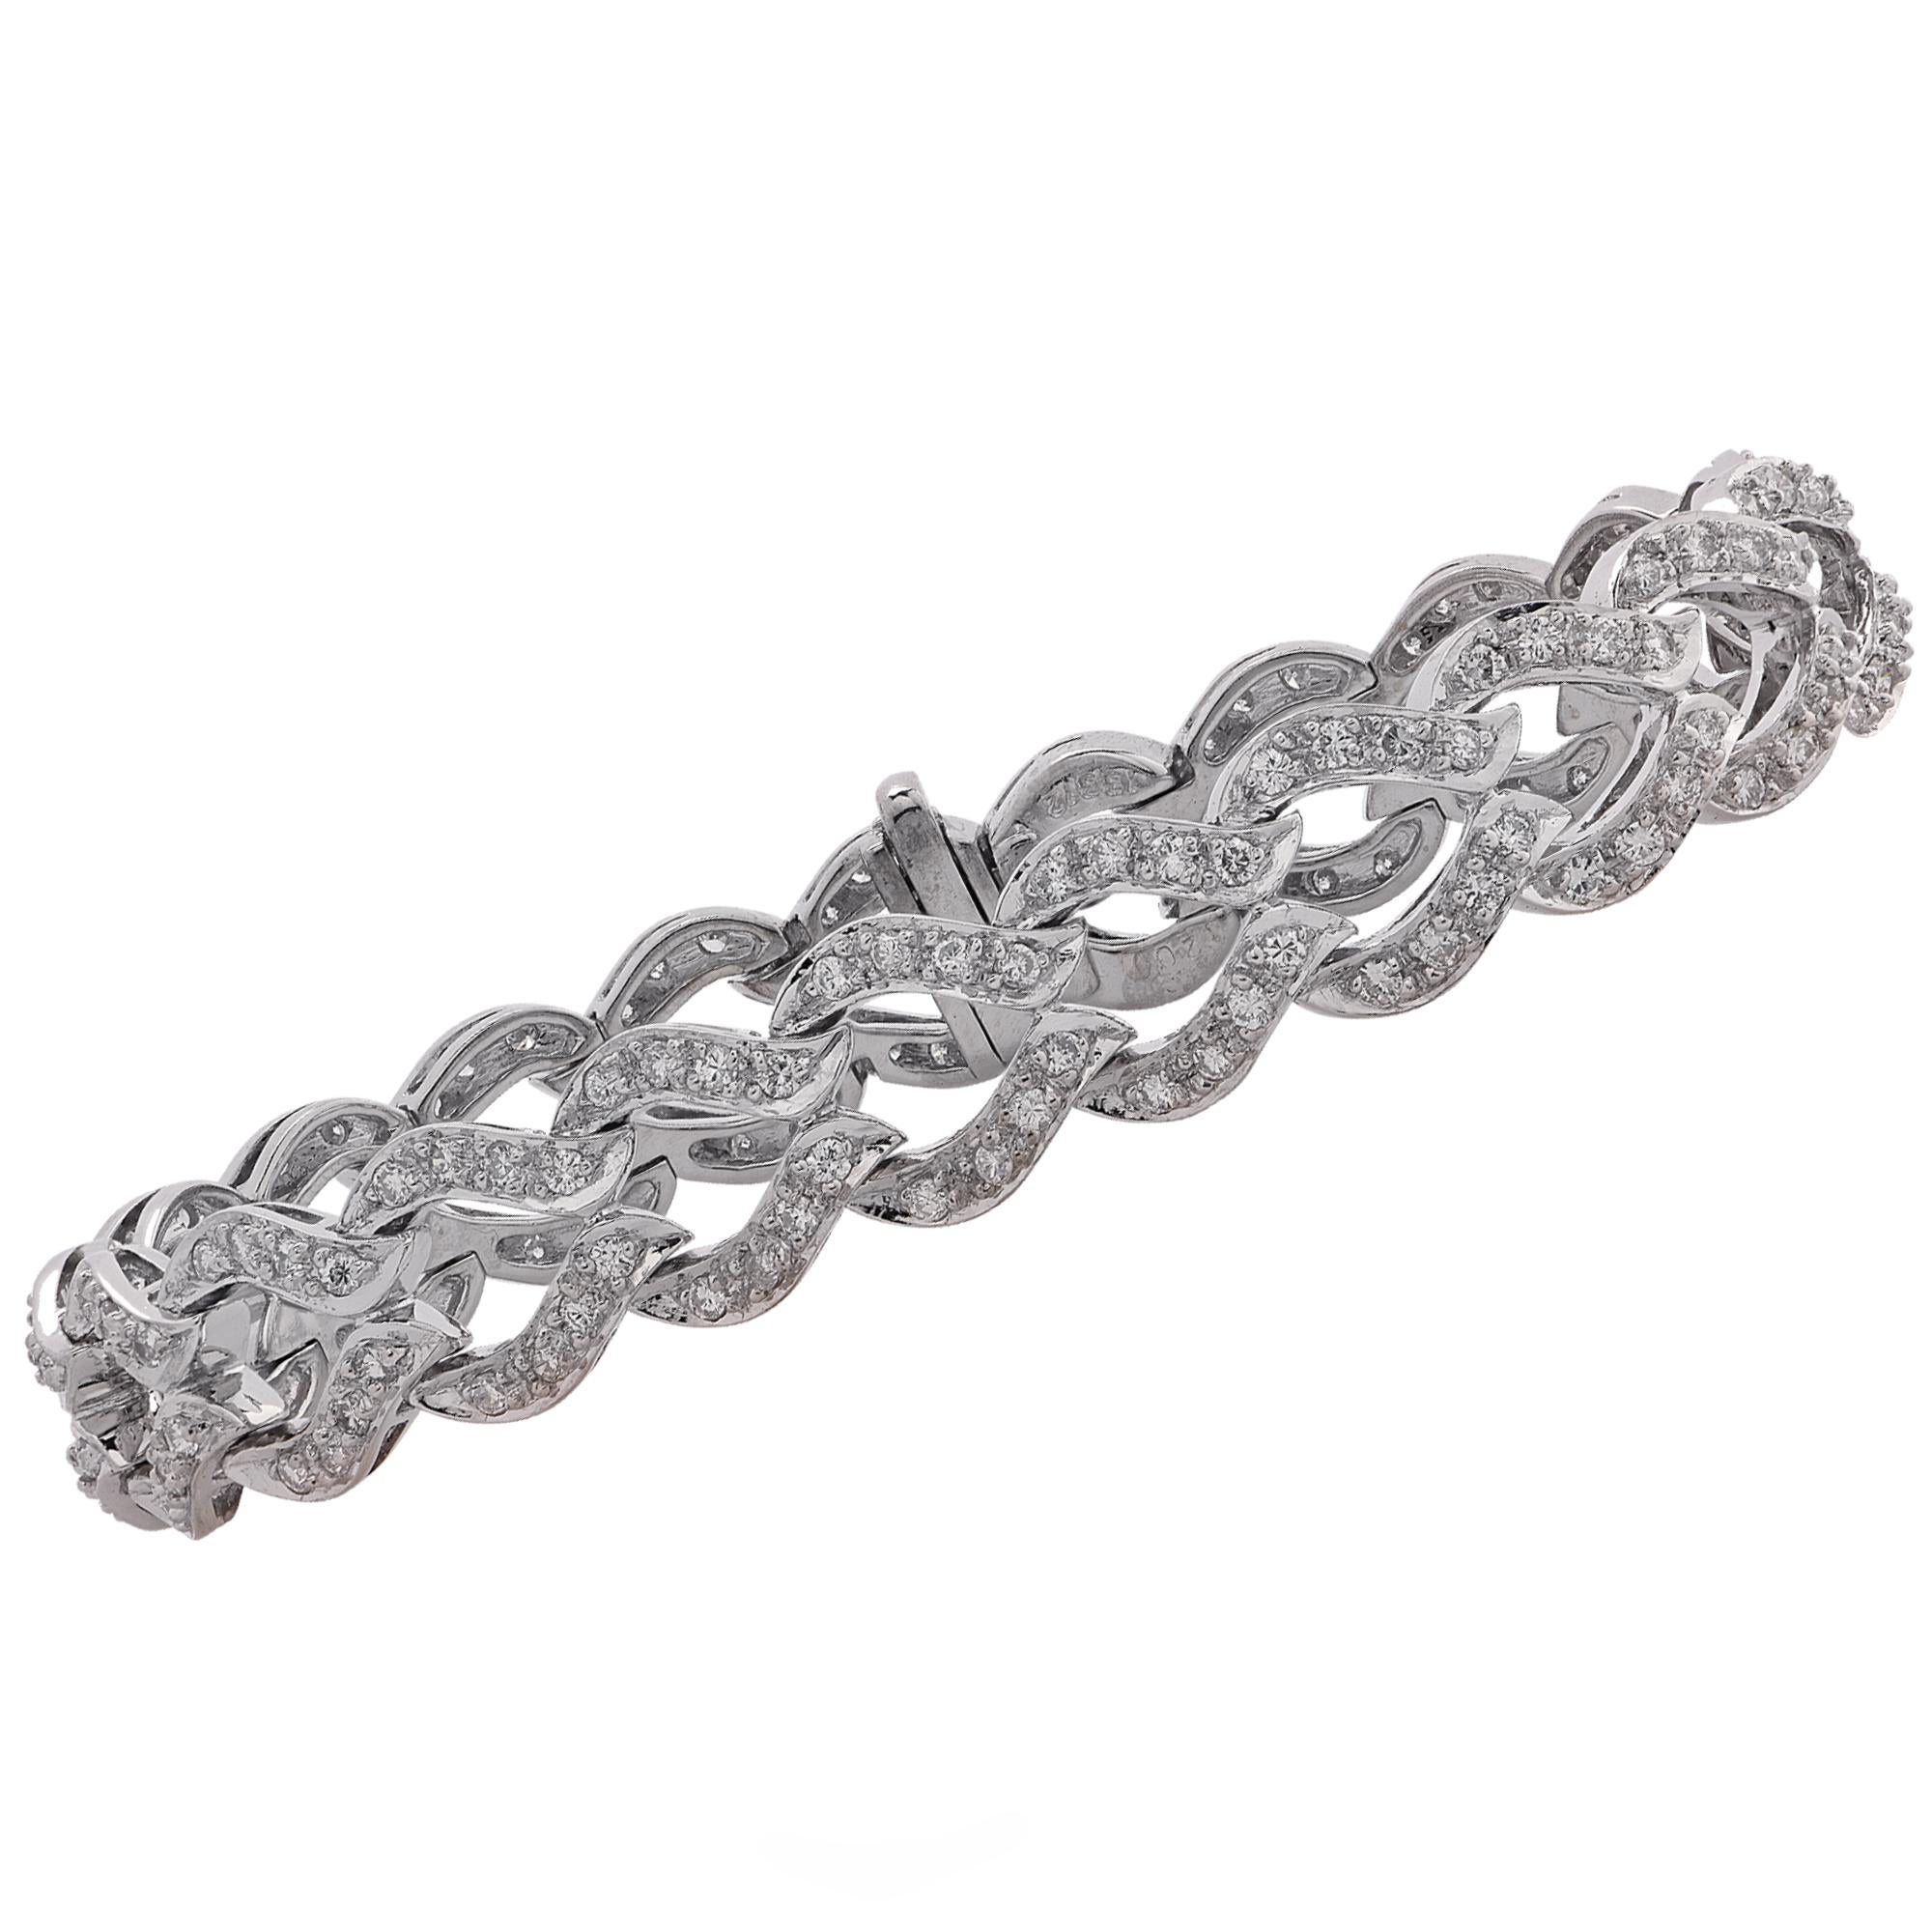 Gorgeous diamond bracelet crafted in 18 karat white gold, featuring approximately 168 round brilliant cut diamonds weighing approximately 3.35 carats, G color, VS clarity. The stunning diamond encrusted links wrap around your wrist and sit